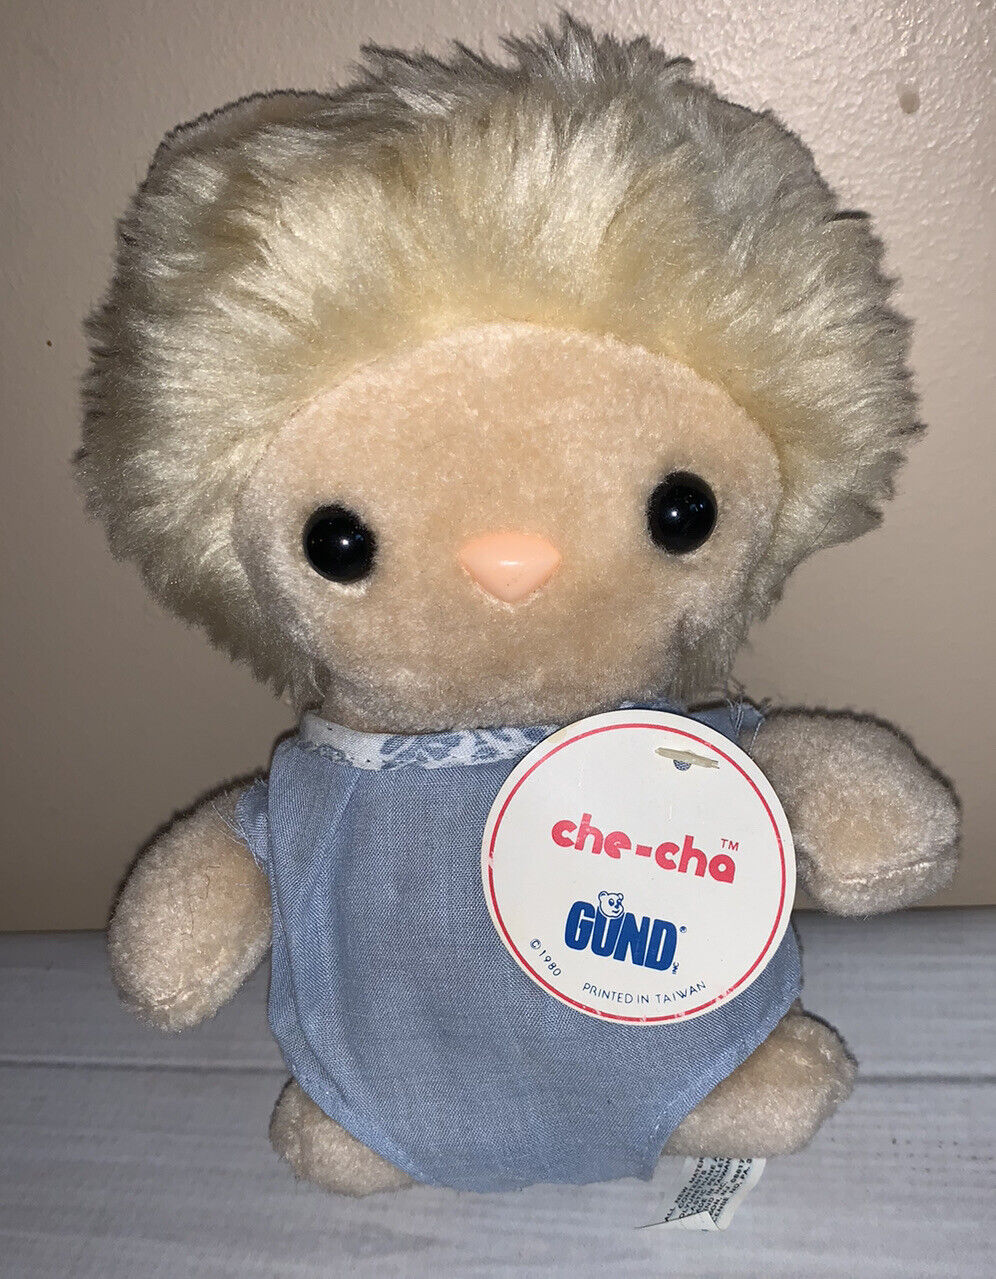 1980 Vintage Gund Che-cha Plush Stuffed Animal With Outfit Cute Rare Gund